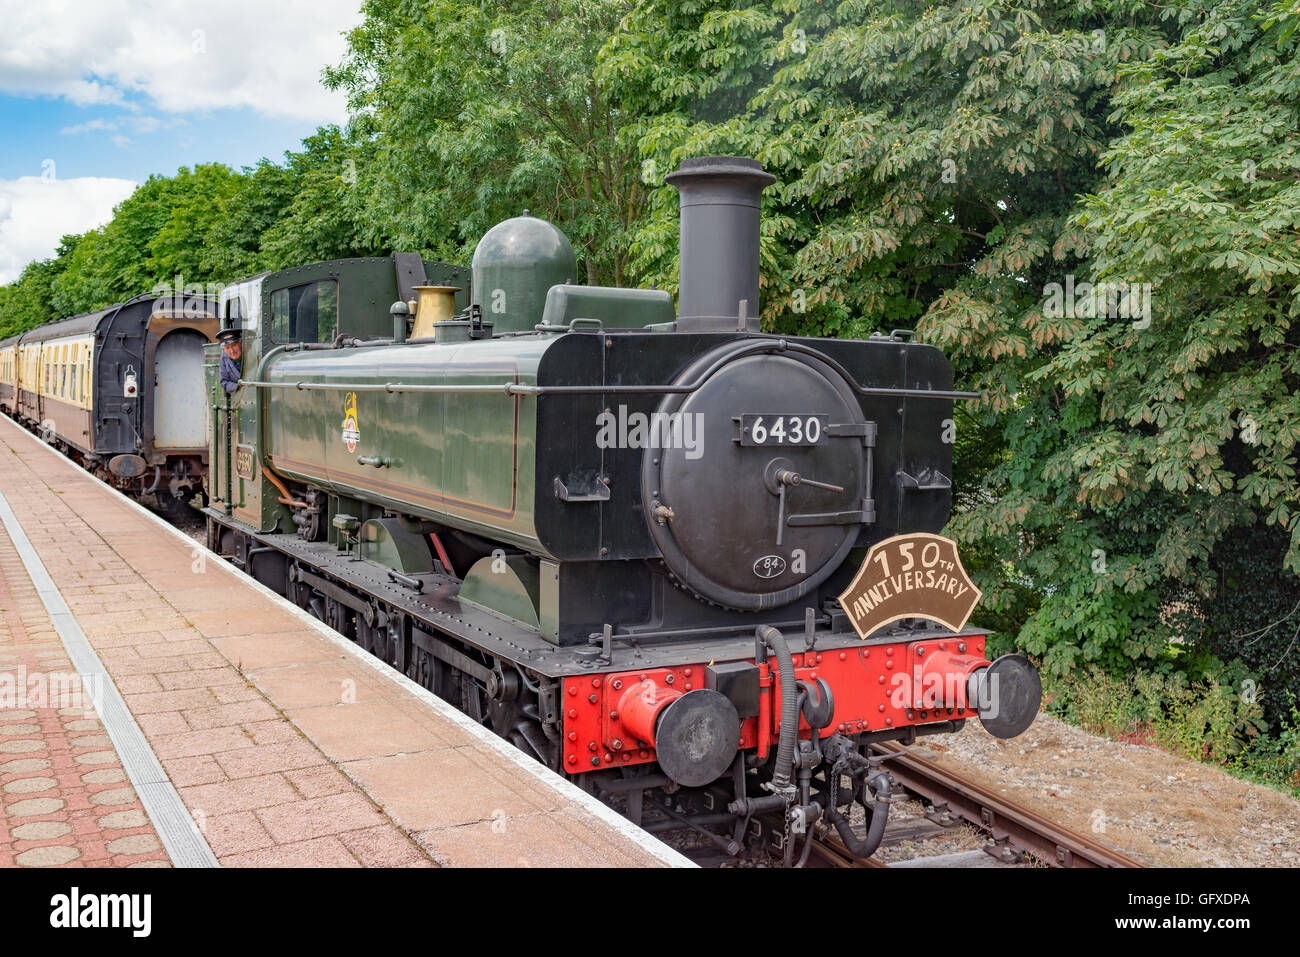 GWR Class 6430 on the Cholsey & Wallingford Railway Stock Photo